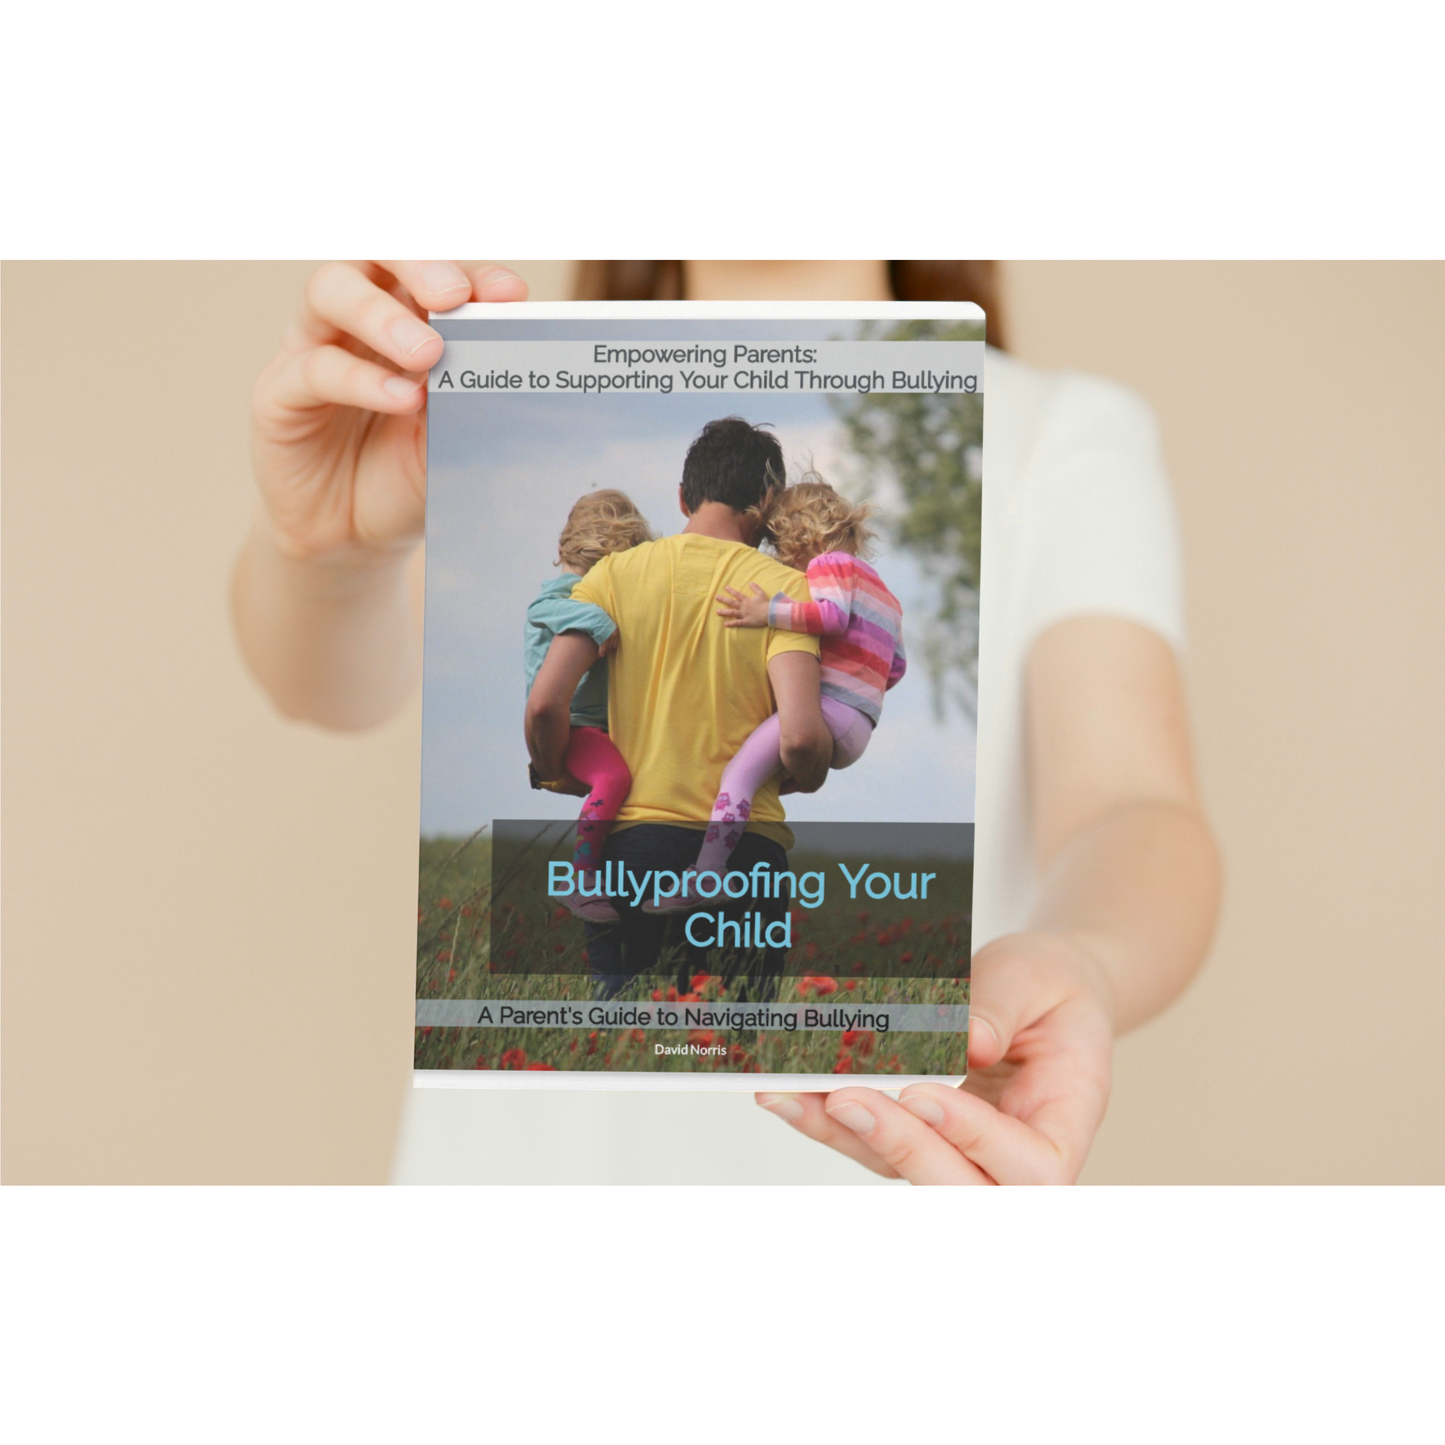 Bullyproofing Your Child - A Parent's Guide to Navigating Bullying, 22 pages, Ebook